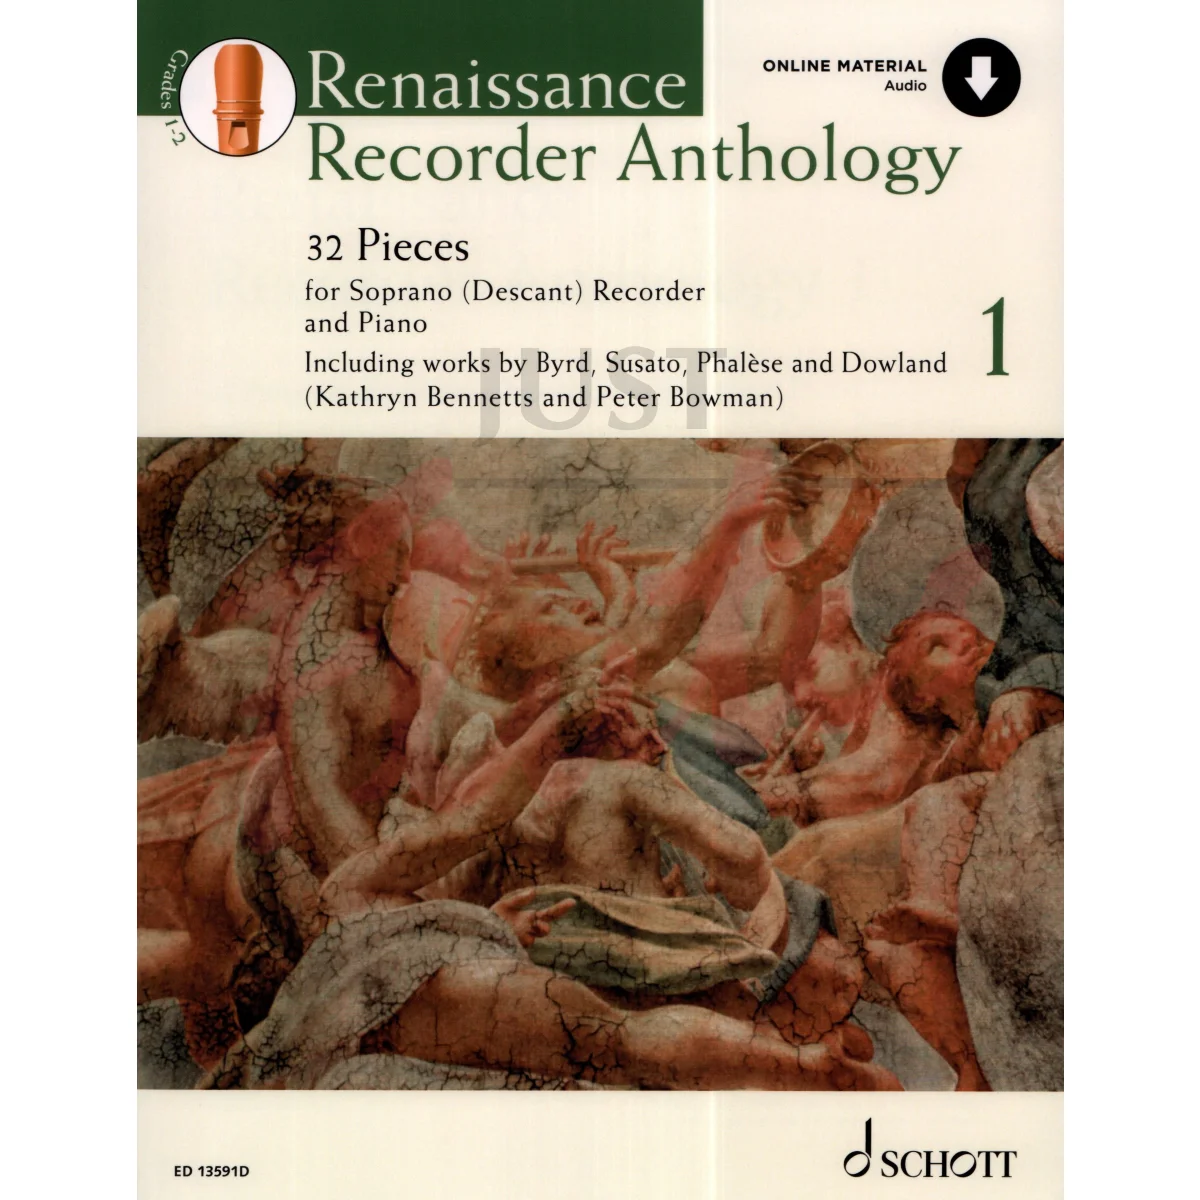 Renaissance Recorder Anthology for Descant Recorder and Piano